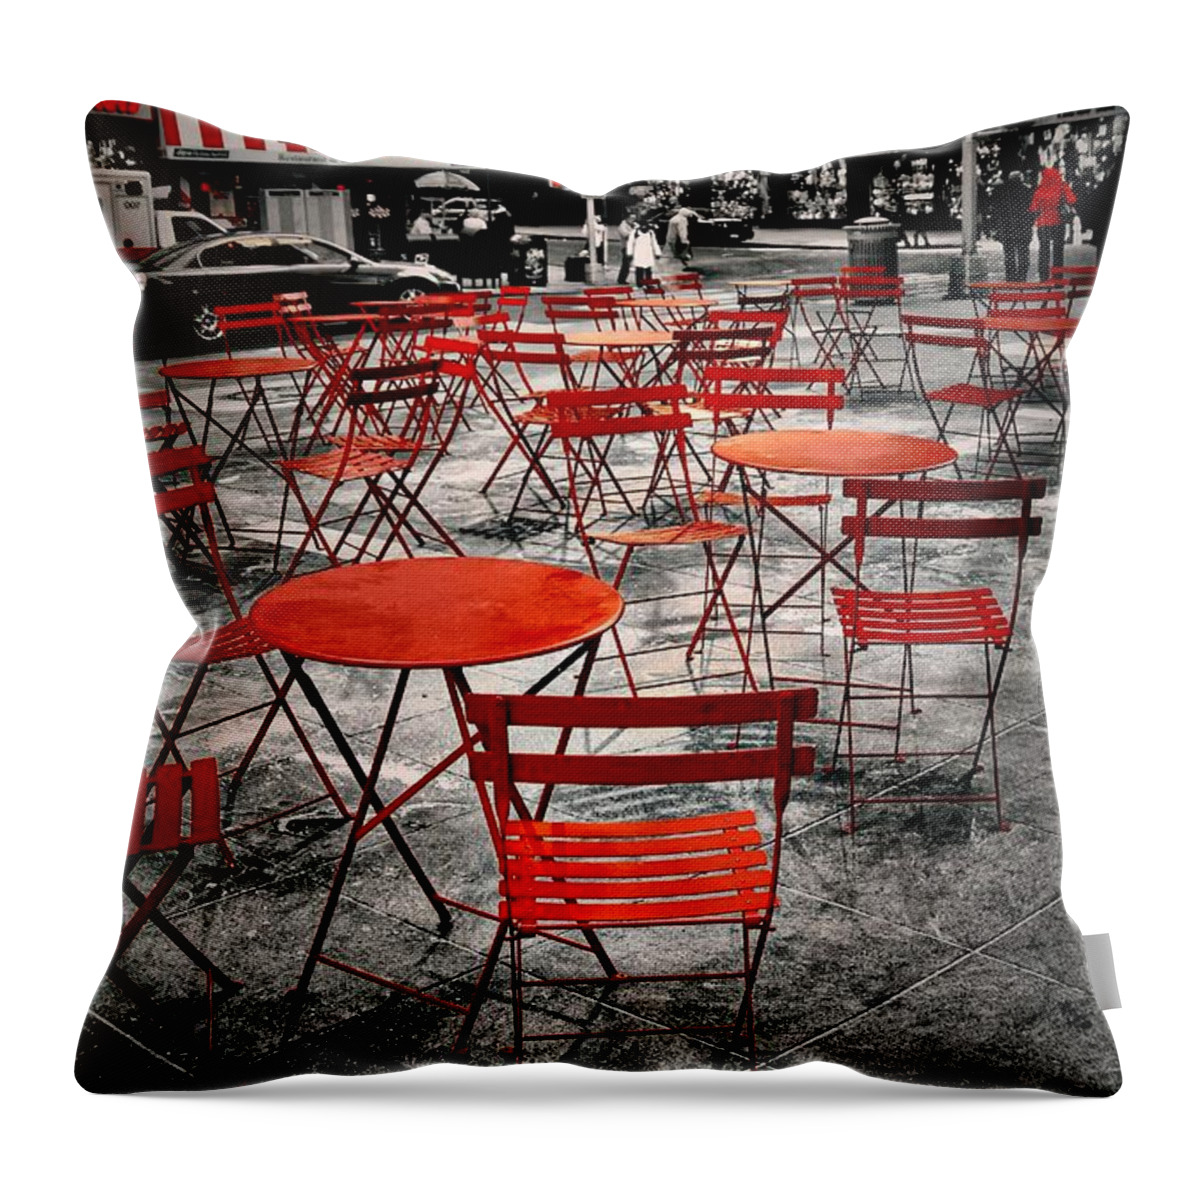 New York City Throw Pillow featuring the photograph Red In My World - New York City by Angie Tirado